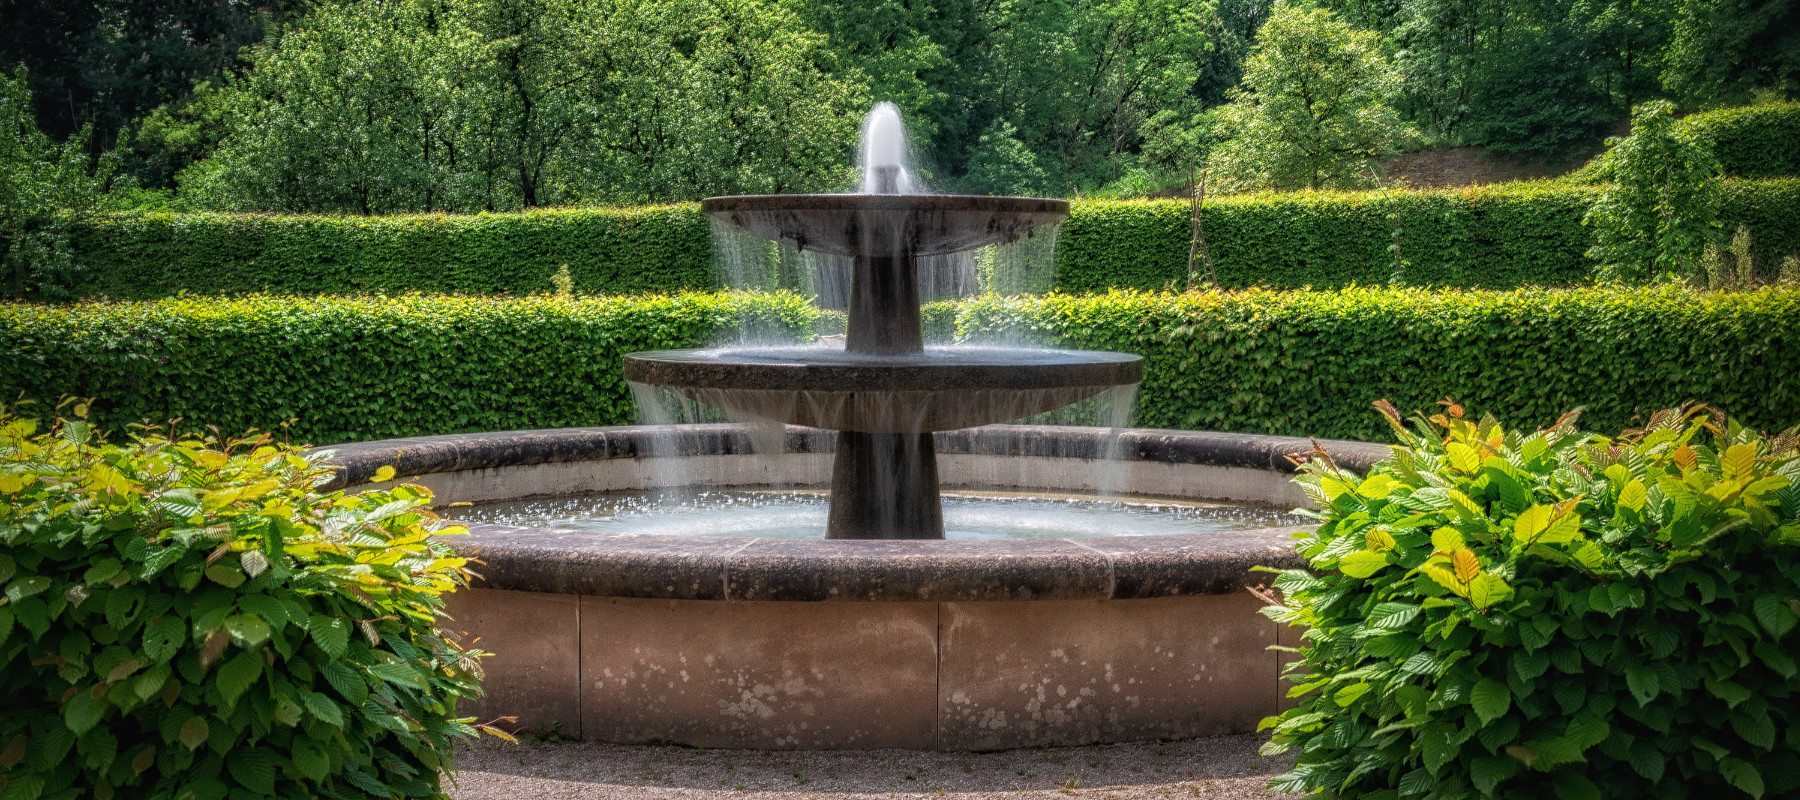 An ornate water fountain set within a well landscaped garden.